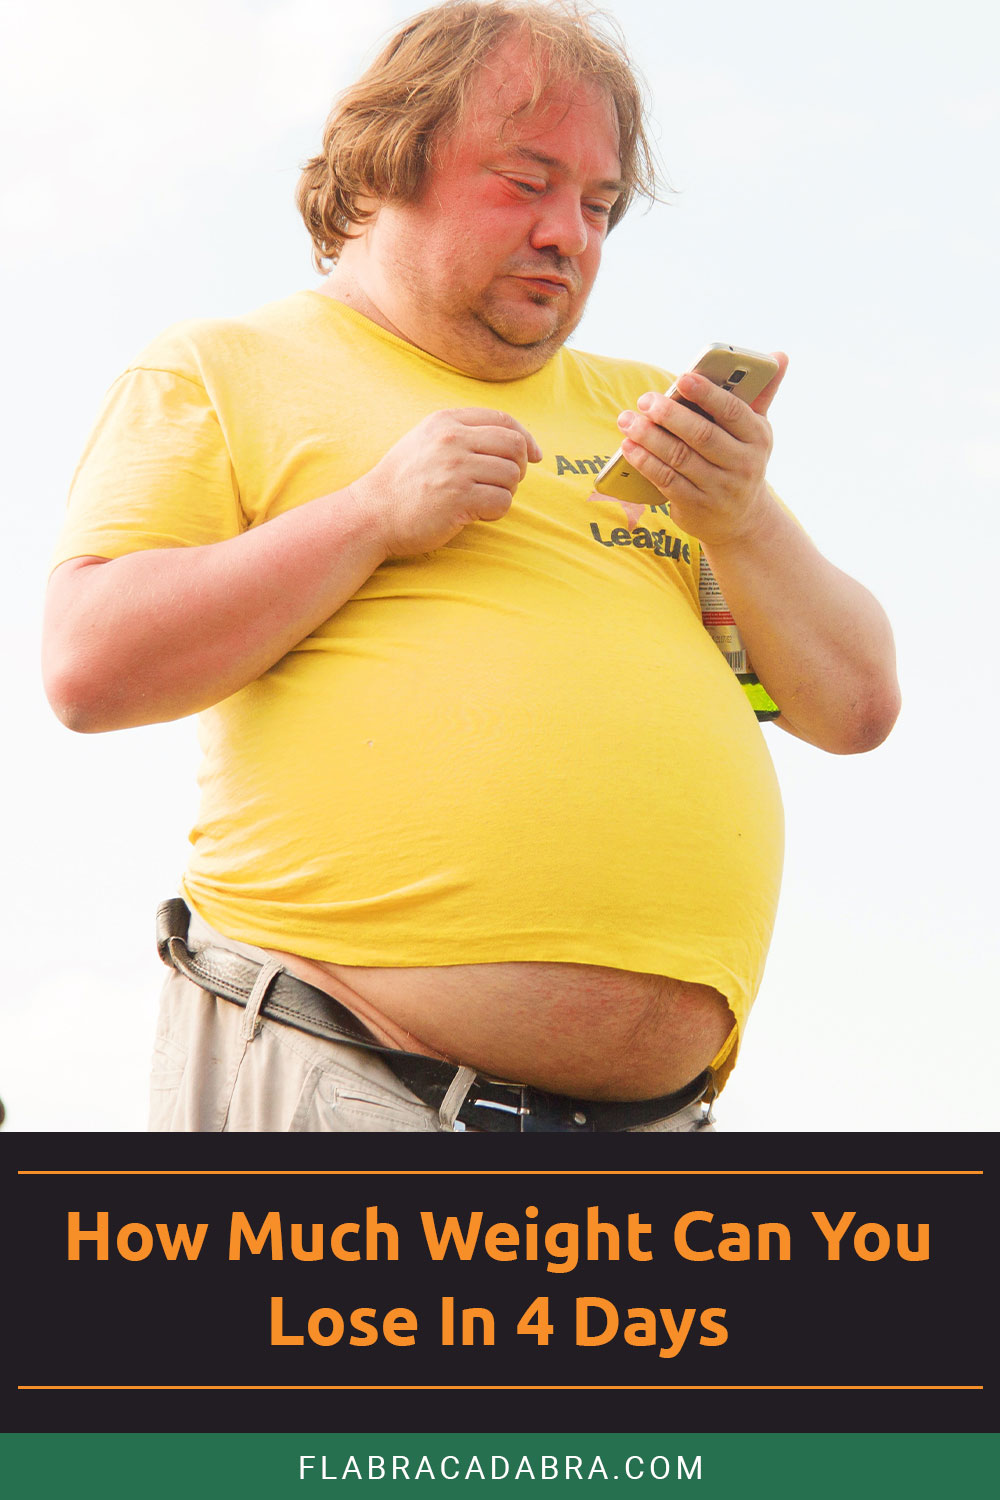 Overweight man in yellow shirt looking at phone - How Much Weight Can You Lose In 4 Days